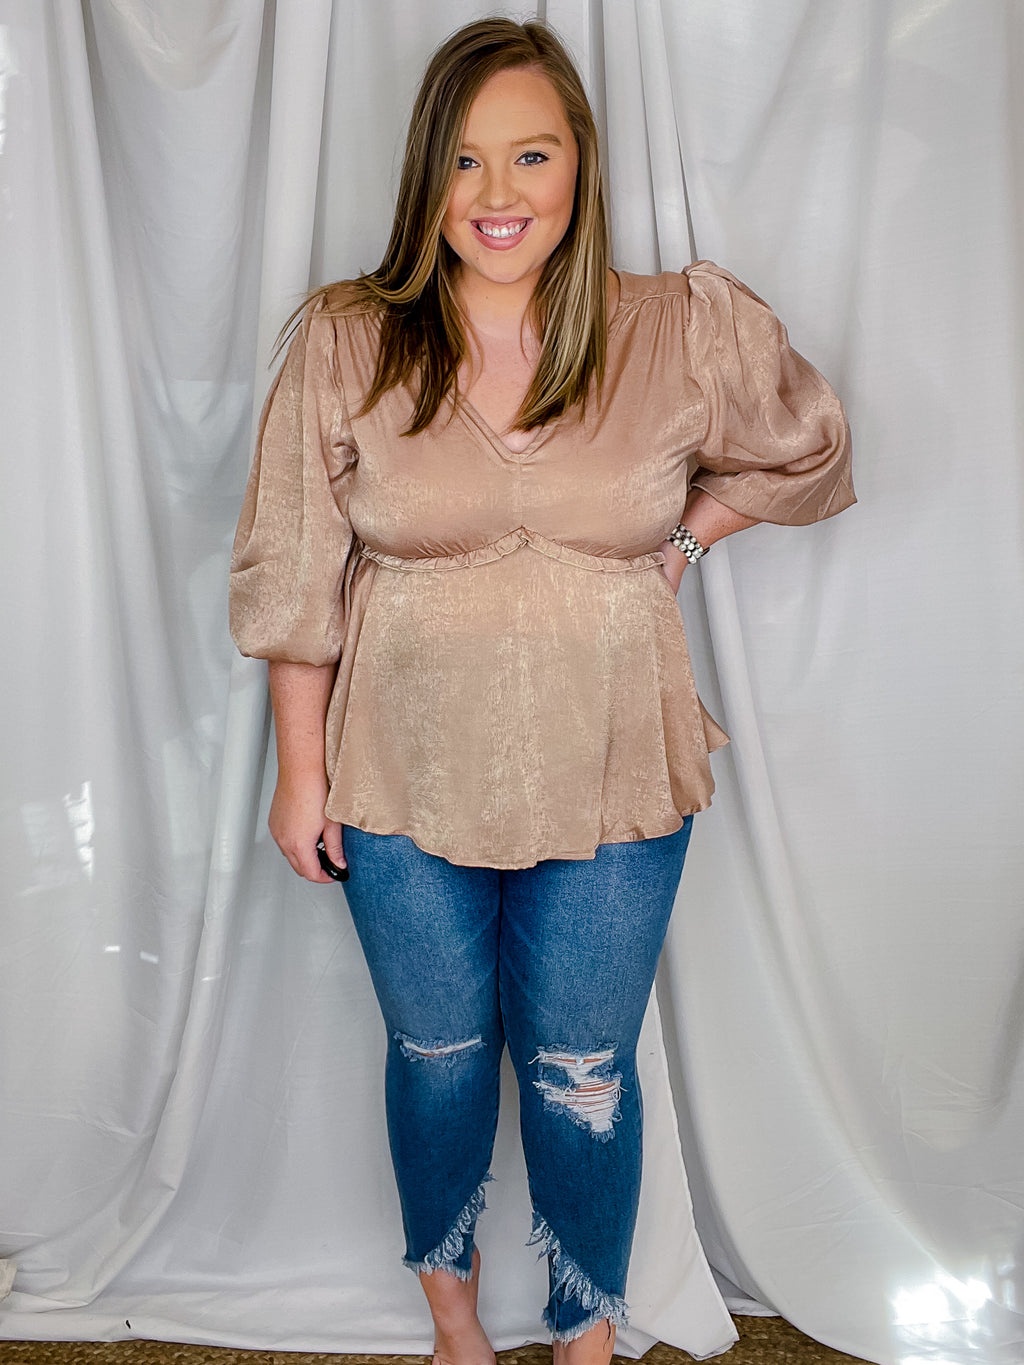 Bottoms feature a medium denim wash, front distressing, stretchy material, skinny leg fit and runs true to size!   *Aubree wore size 14 